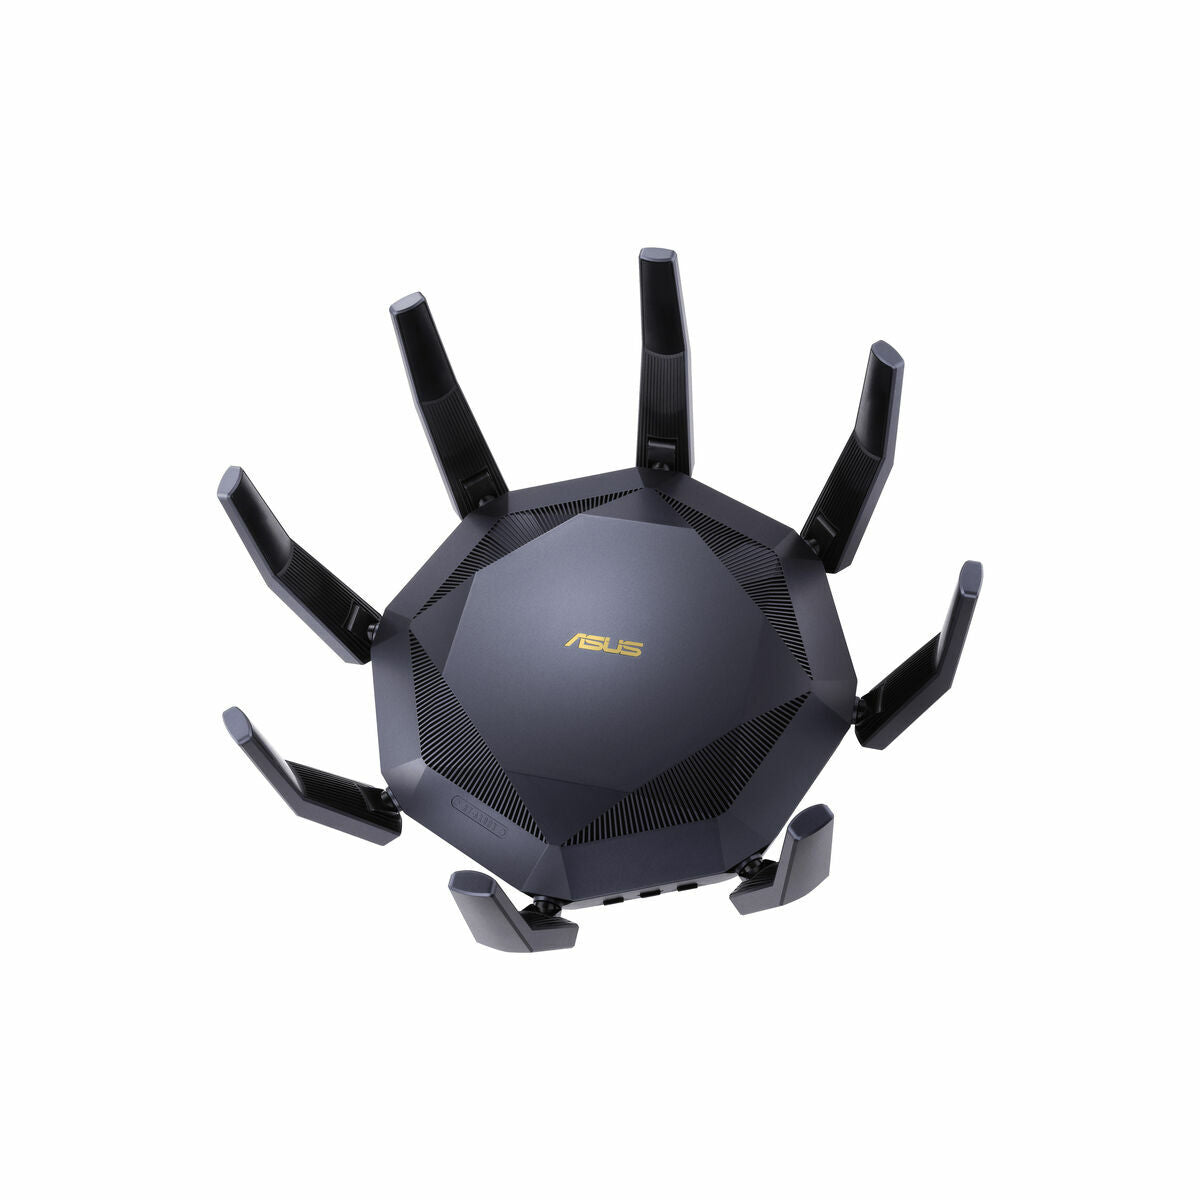 Router Asus 90IG04J1-BM3010, Asus, Computing, Network devices, router-asus-90ig04j1-bm3010, Brand_Asus, category-reference-2609, category-reference-2803, category-reference-2826, category-reference-t-19685, category-reference-t-19914, category-reference-t-21371, Condition_NEW, networks/wiring, Price_300 - 400, Teleworking, RiotNook